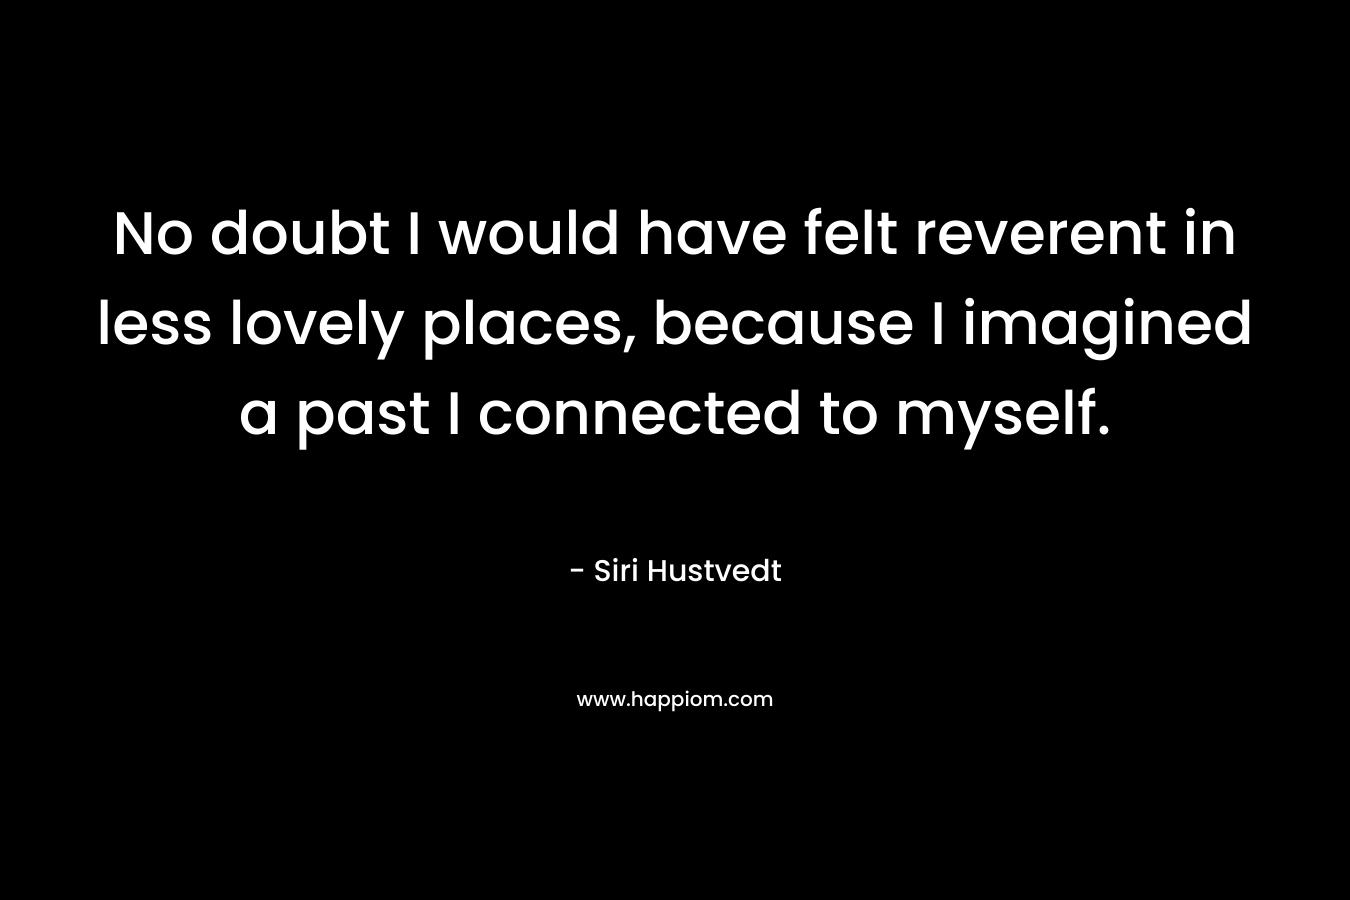 No doubt I would have felt reverent in less lovely places, because I imagined a past I connected to myself. – Siri Hustvedt